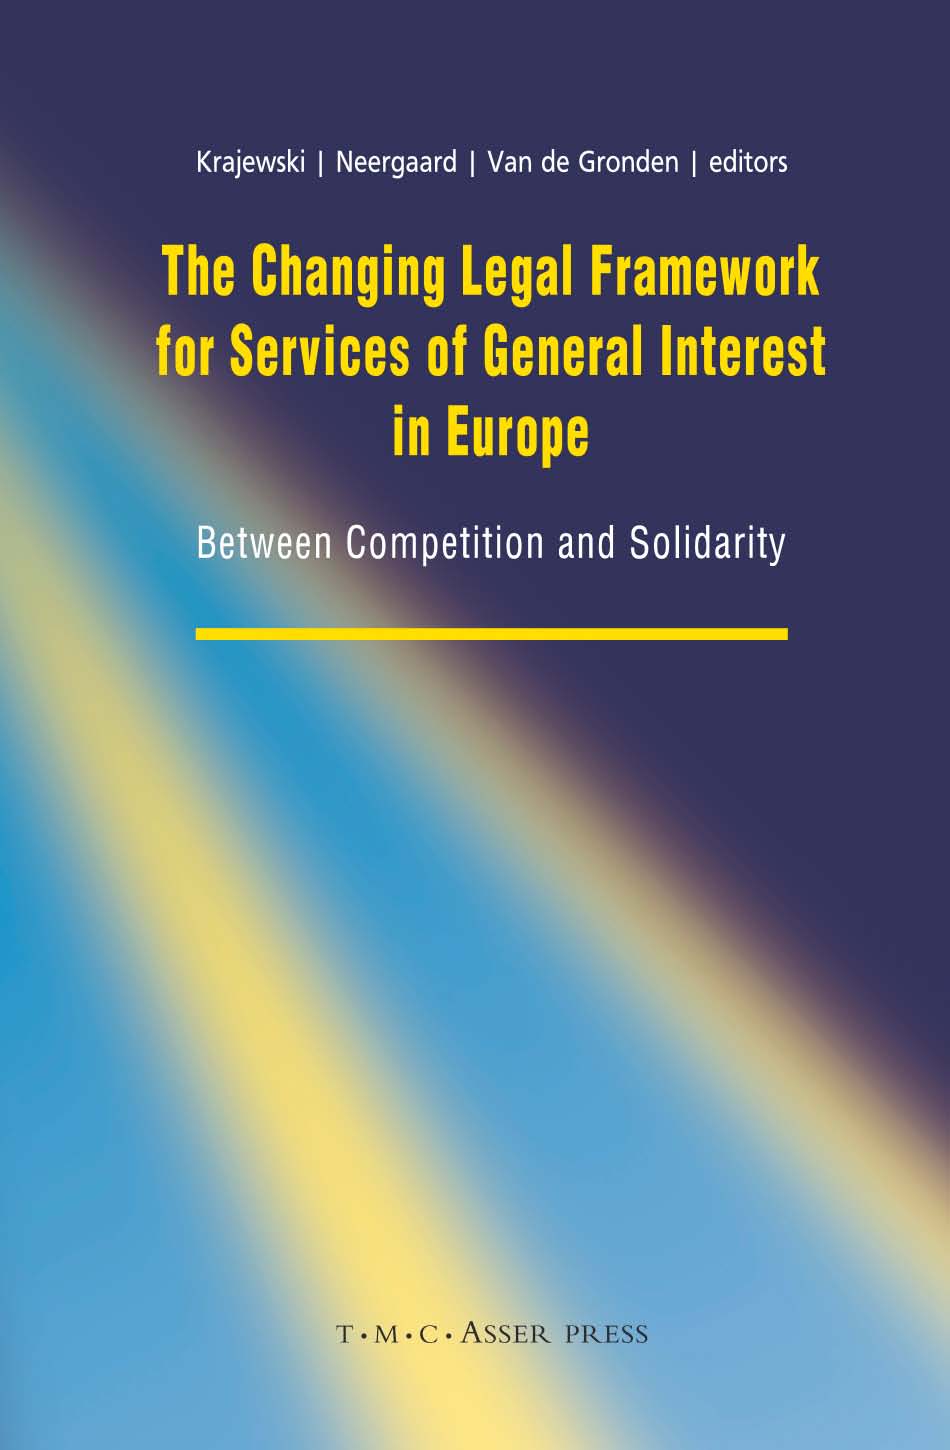 The Changing Legal Framework for Services of General Interest in Europe - Between Competition and Solidarity